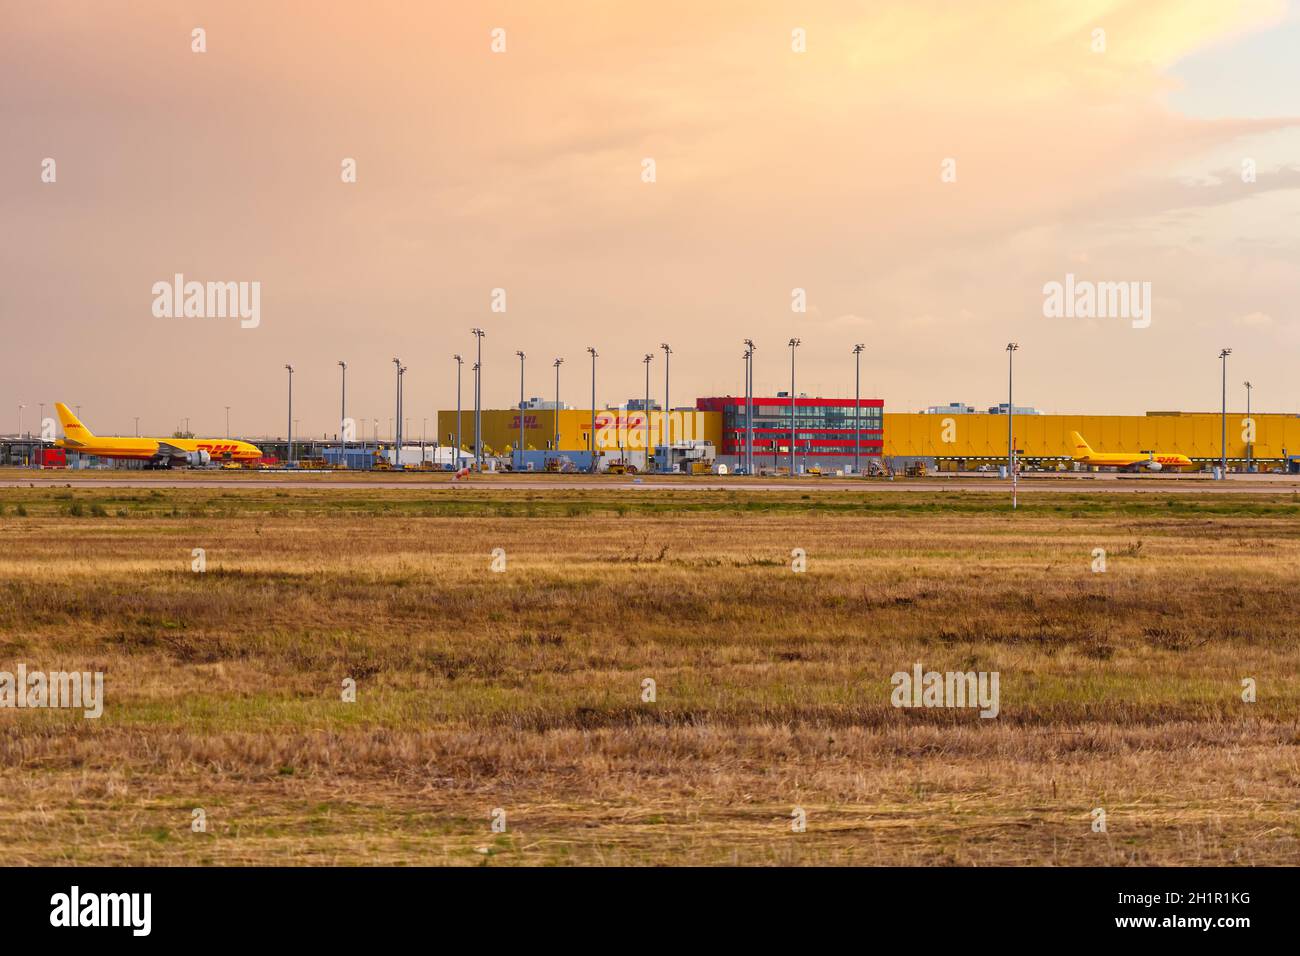 Air Freight Hub High Resolution Stock Photography and Images - Alamy